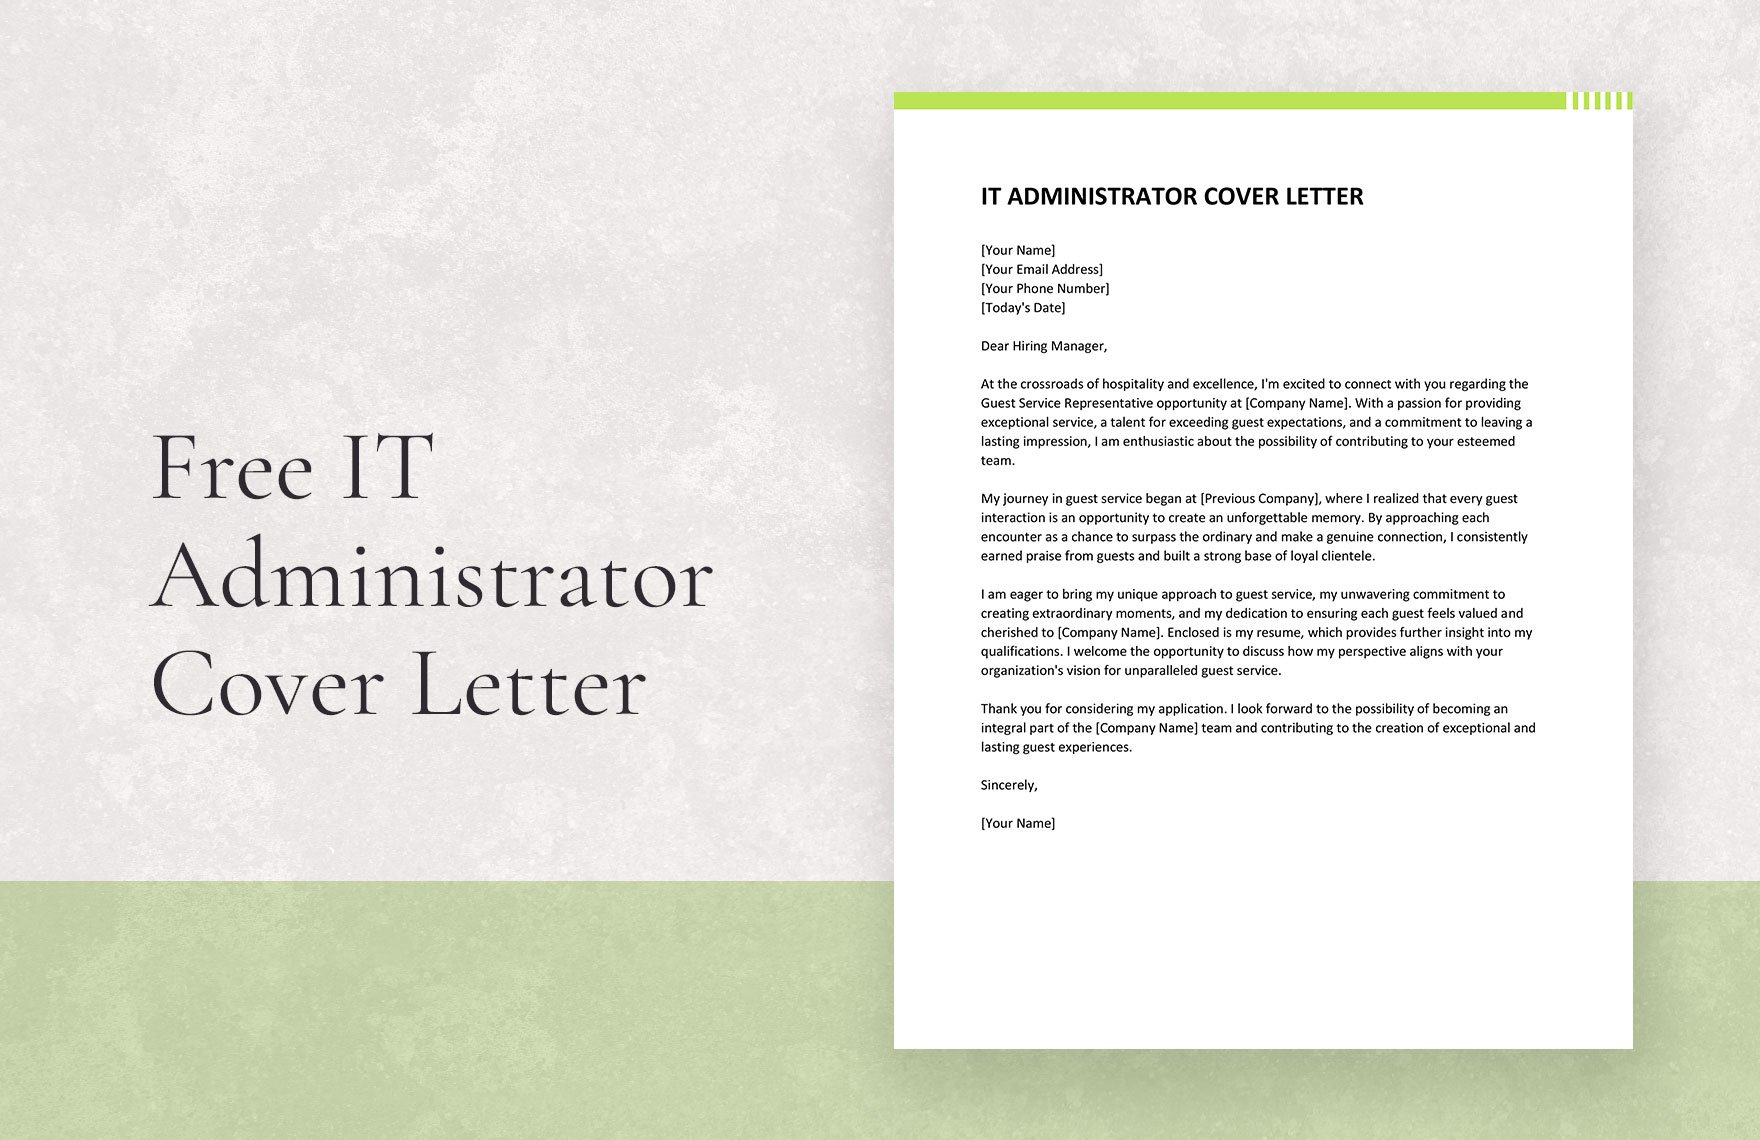 IT Administrator Cover Letter